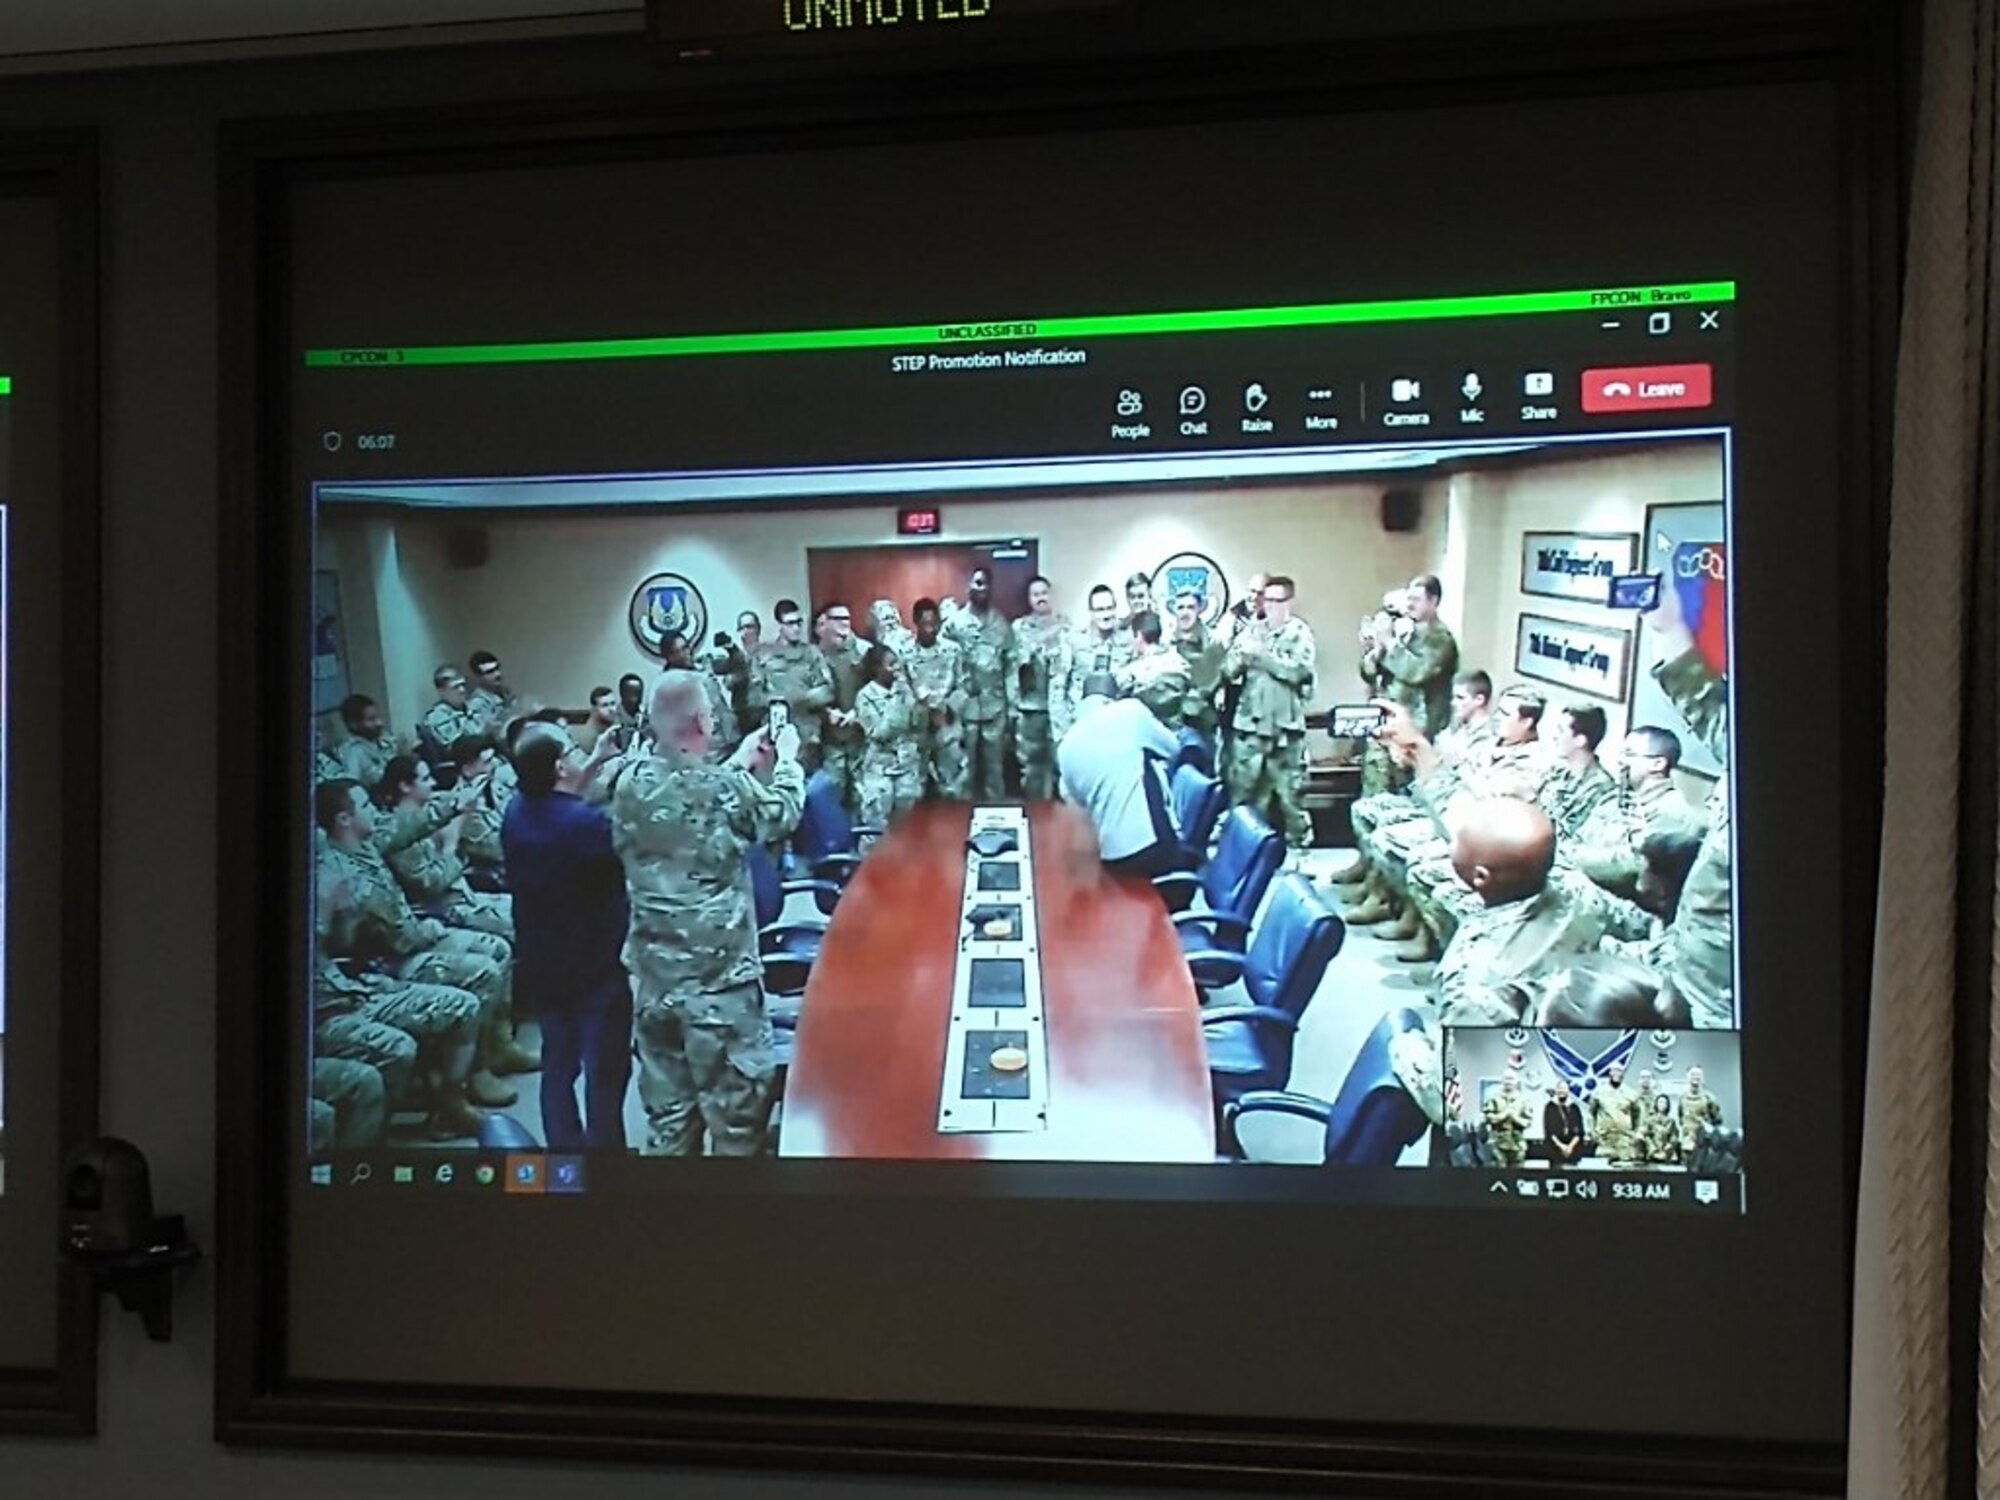 Members at Robins AFB watch as Air Force Sustainment Center Commander, Lt. Gen. Stacey T. Hawkins promoted two 78th Logistics Readiness Squadron members via video teleconference from Tinker AFB, Oklahoma.